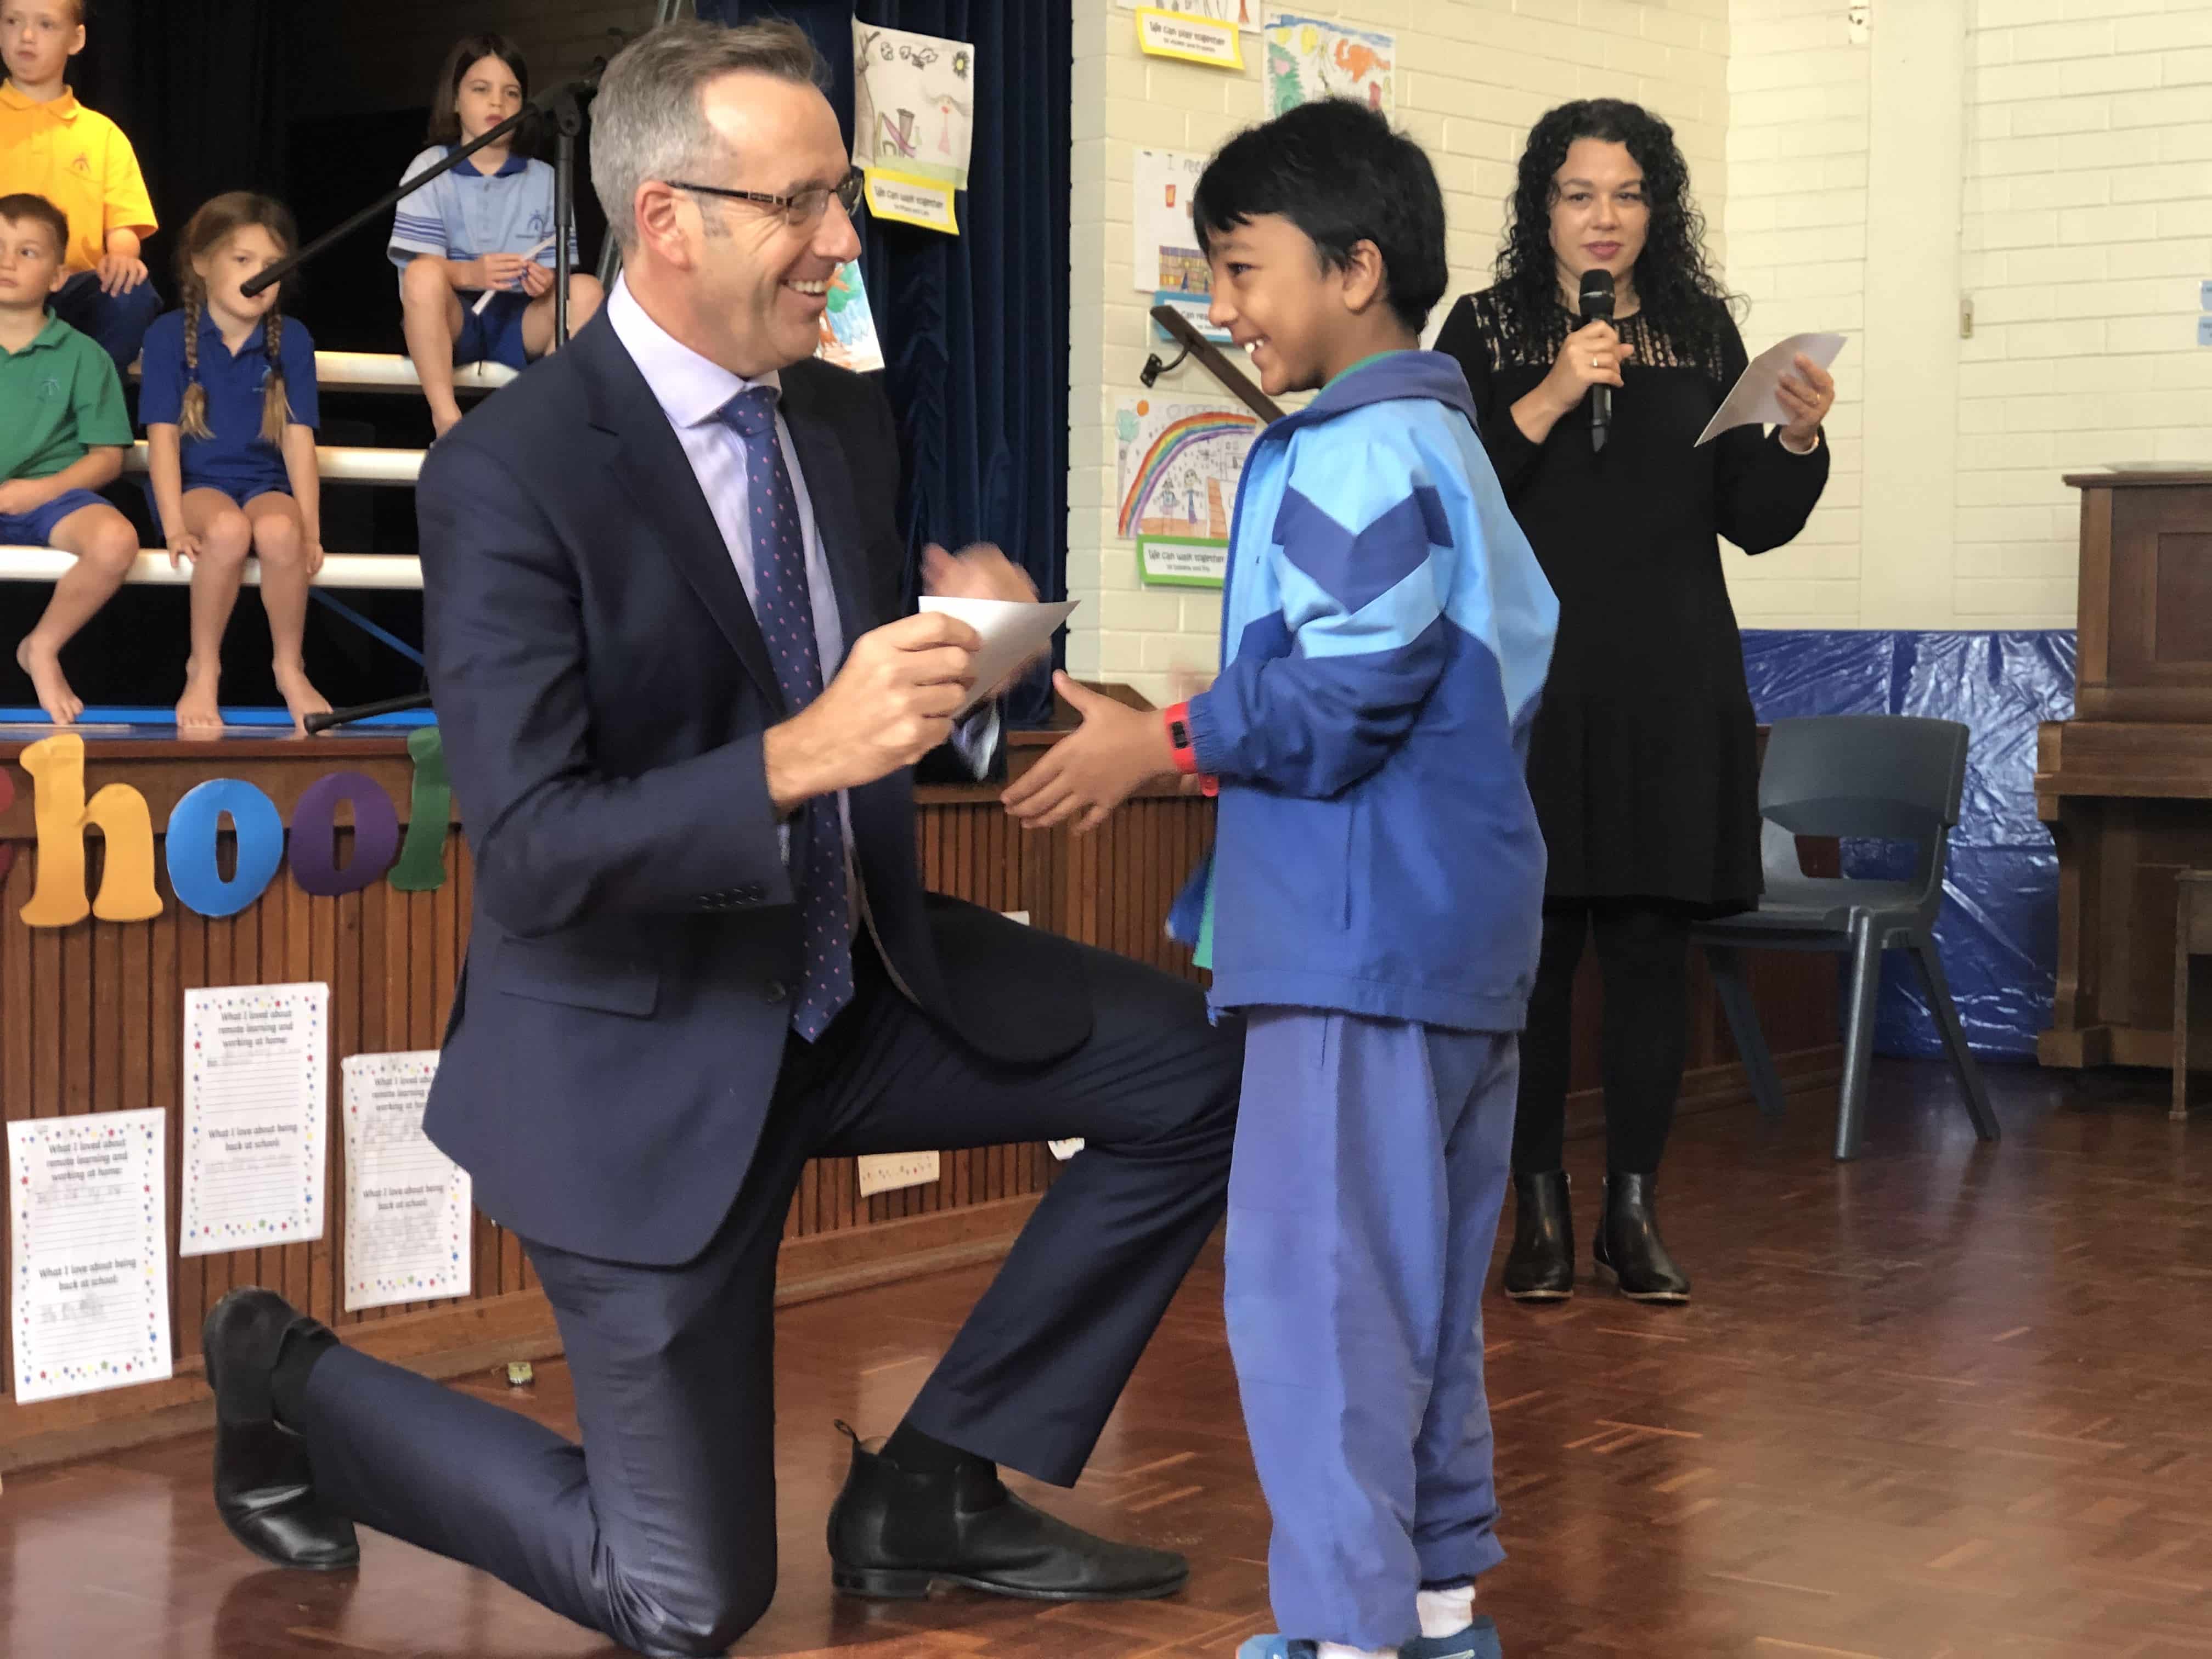 Newman News Term 2 Week 4: From the Principal